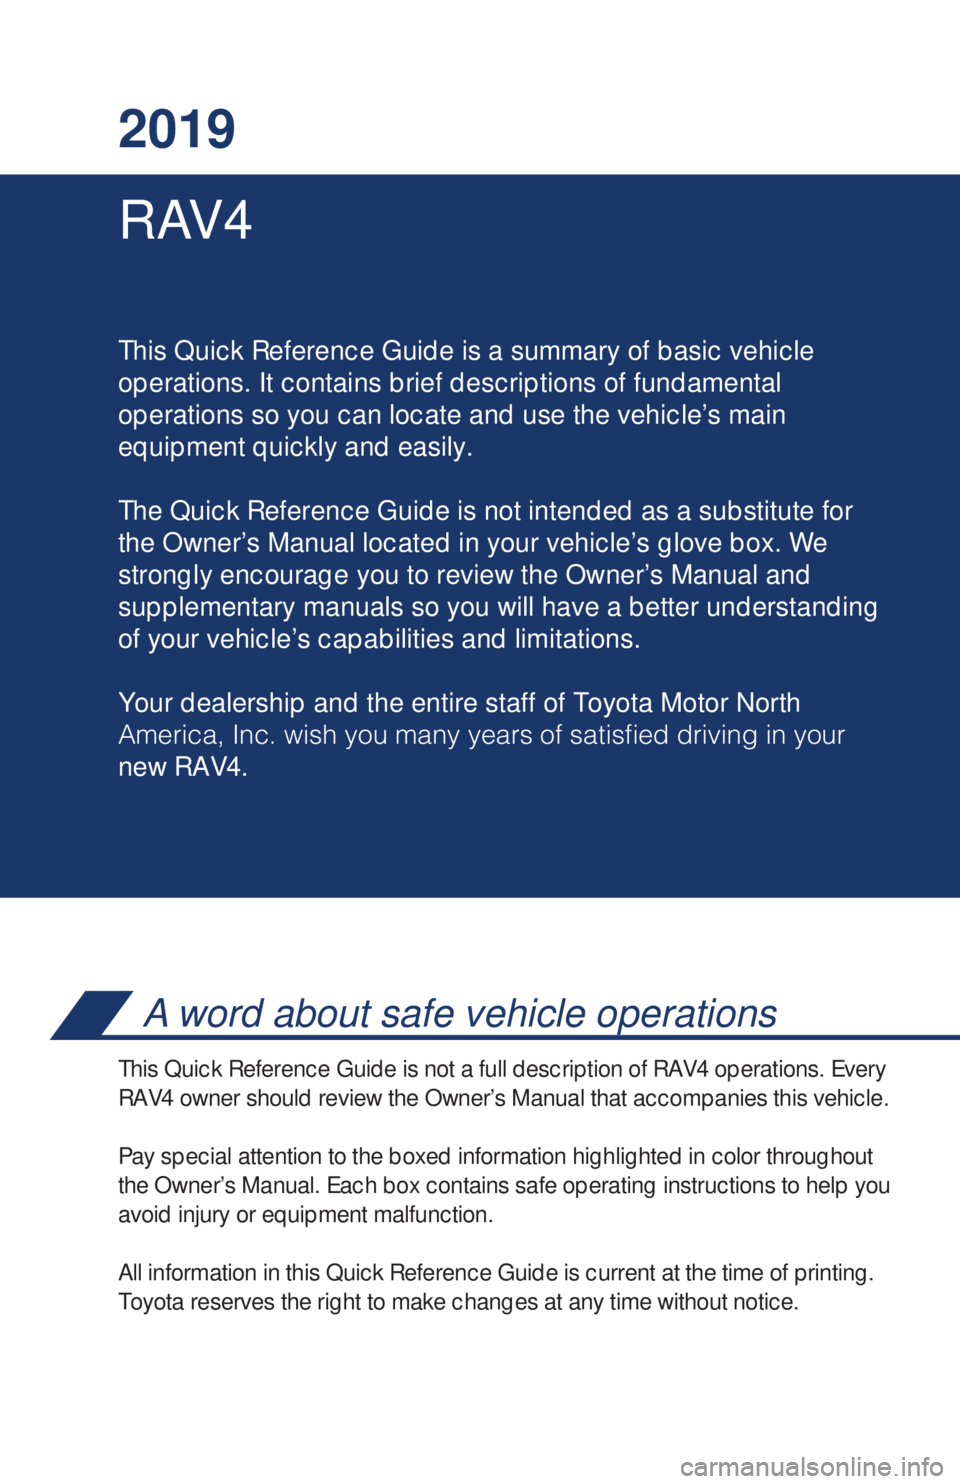 TOYOTA RAV4 2019  Owners Manual (in English) RAV4 2019
This Quick Reference Guide is a summary of basic vehicle
operations. It contains brief descriptions of fundamental
operations so you can locate and use the vehicle’s main 
equipment quickl